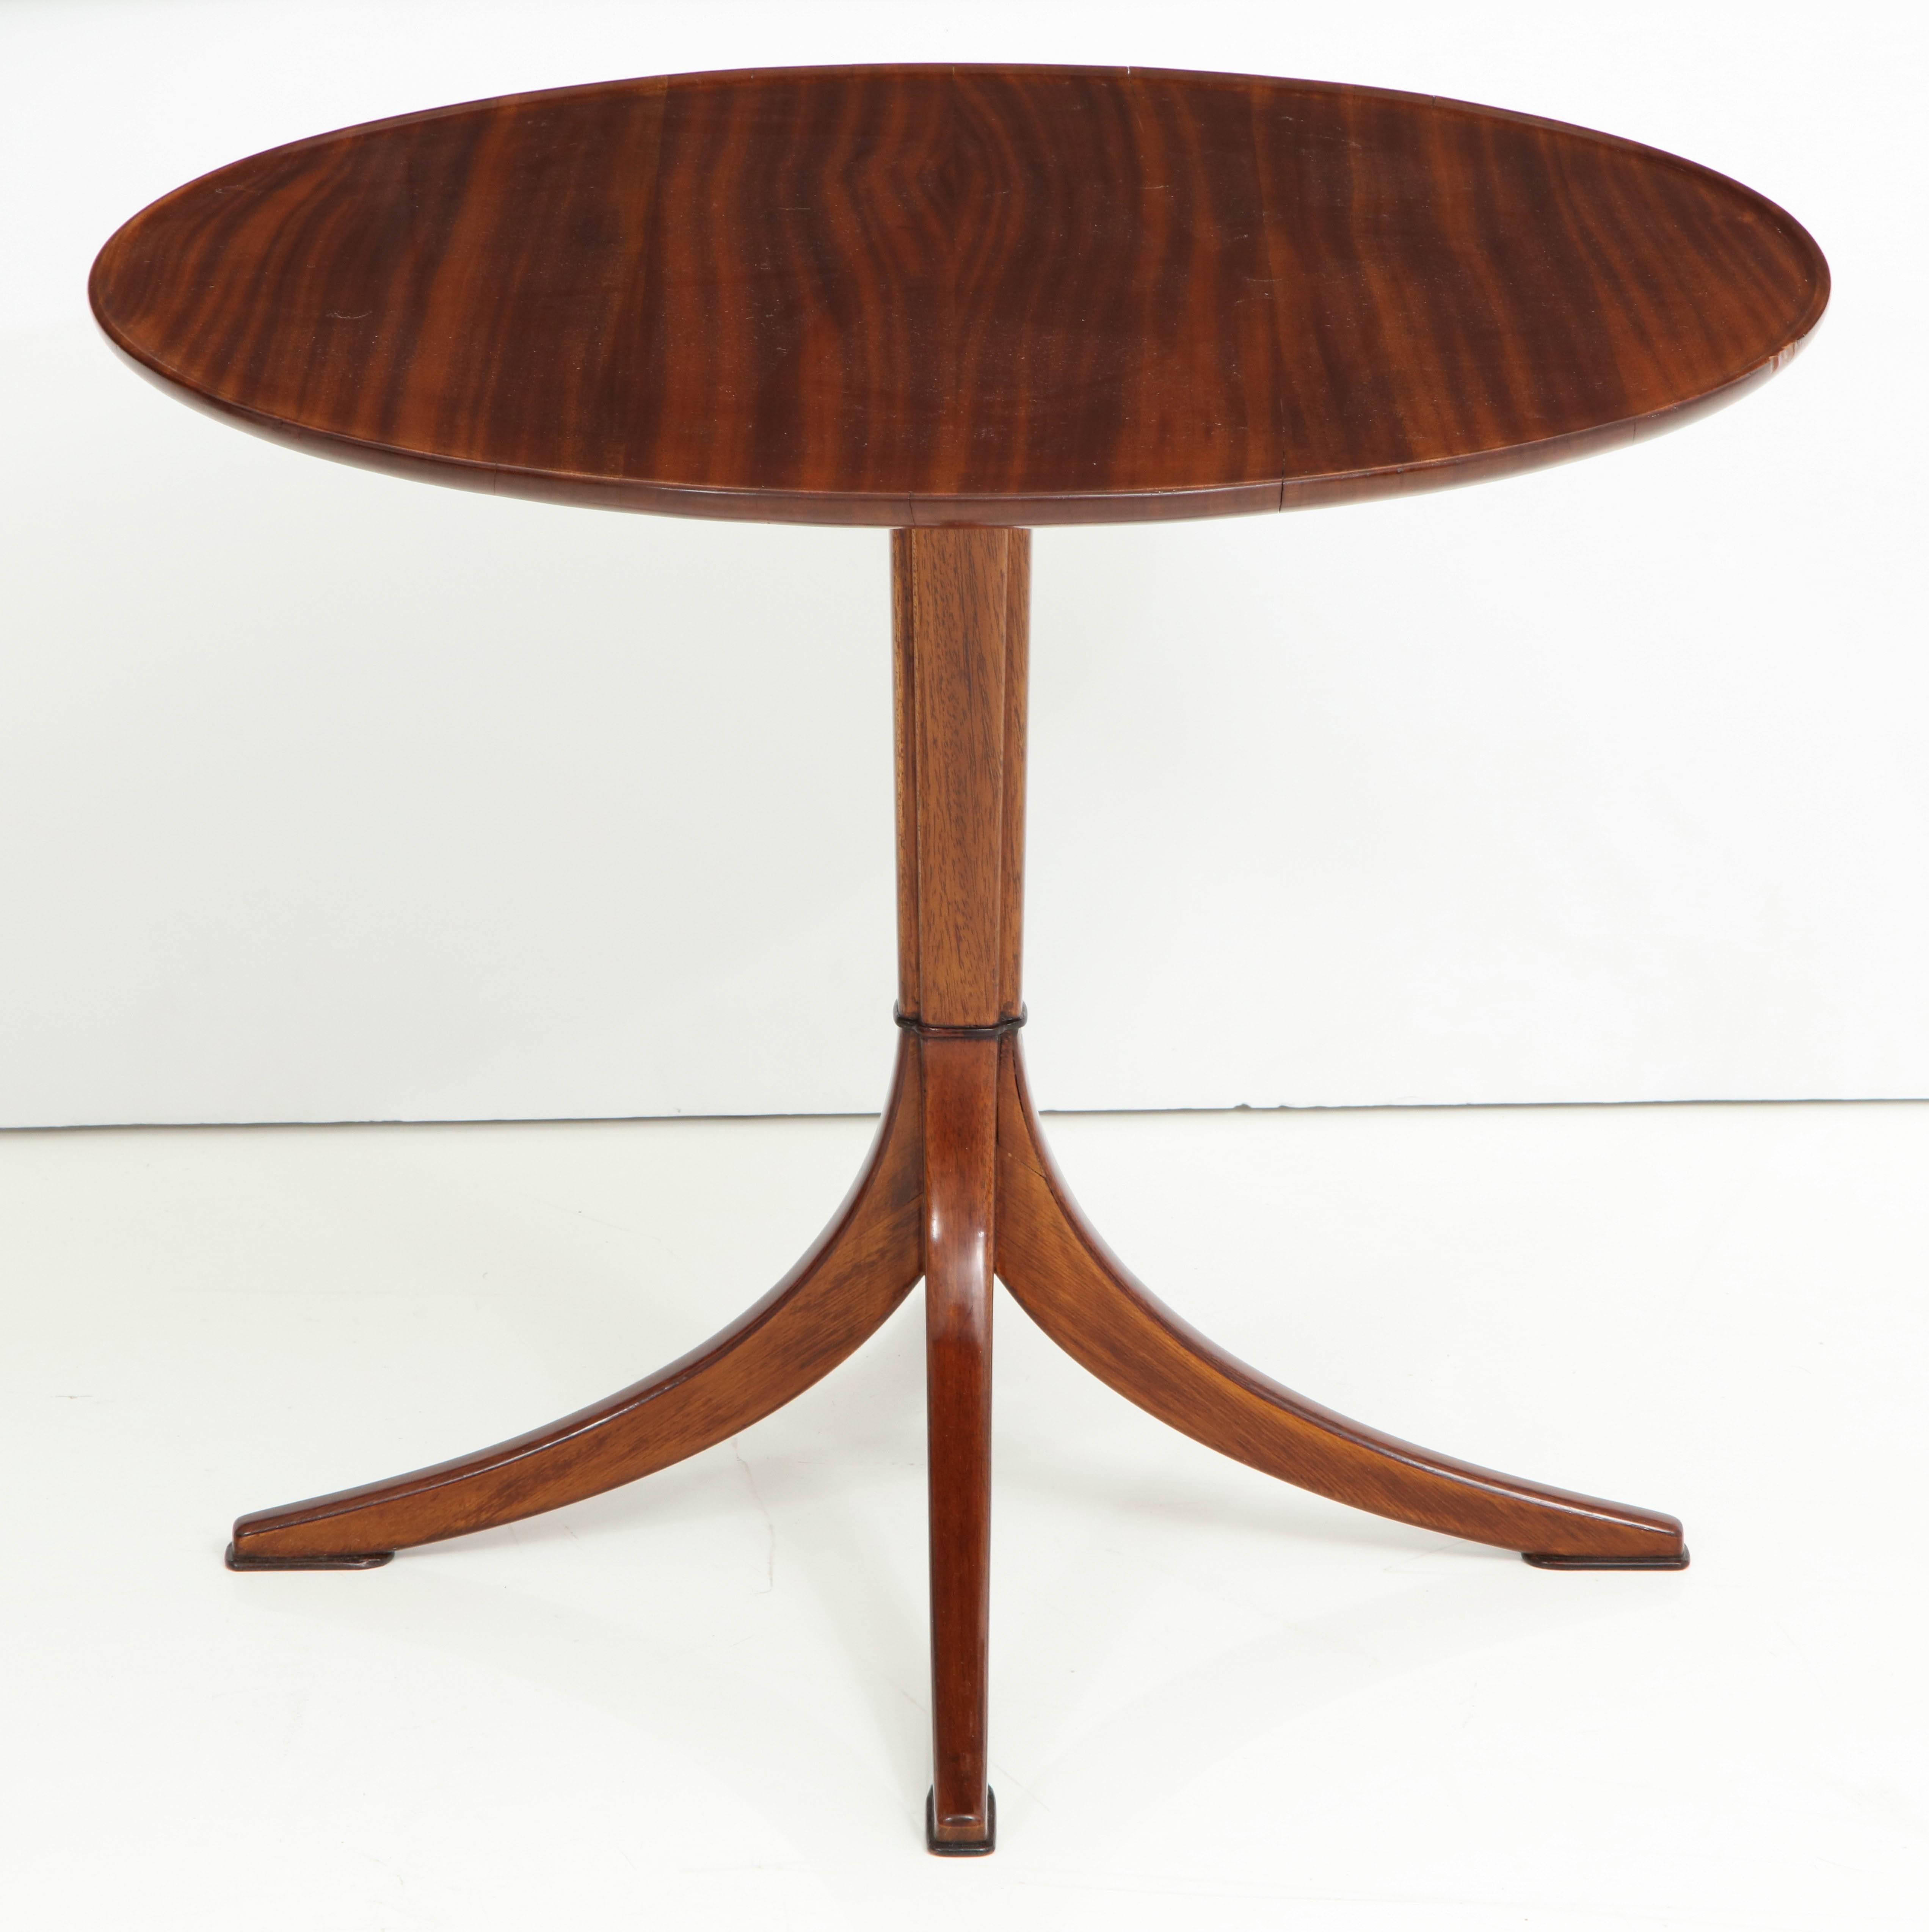 Scandinavian Modern Frits Henningsen rich mahogany side table, circa 1940s, with a circular edged top raised on a clustered stem with four downswept legs.